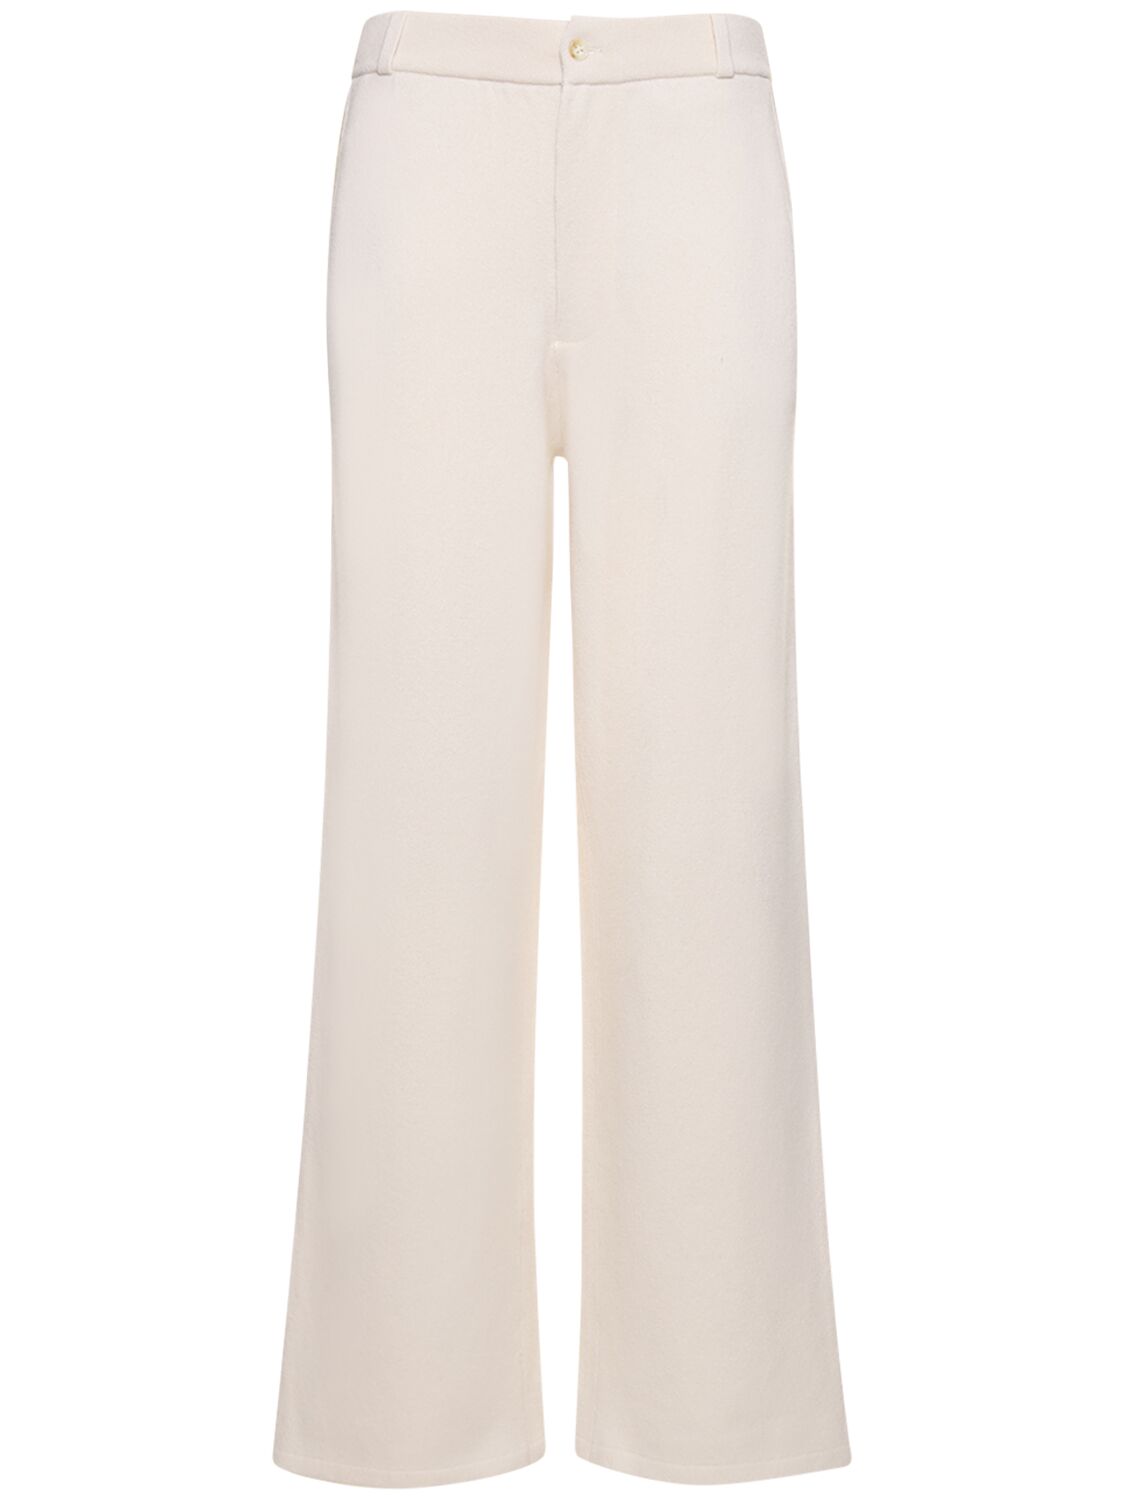 Guest In Residence Tailored Cashmere Pants In White